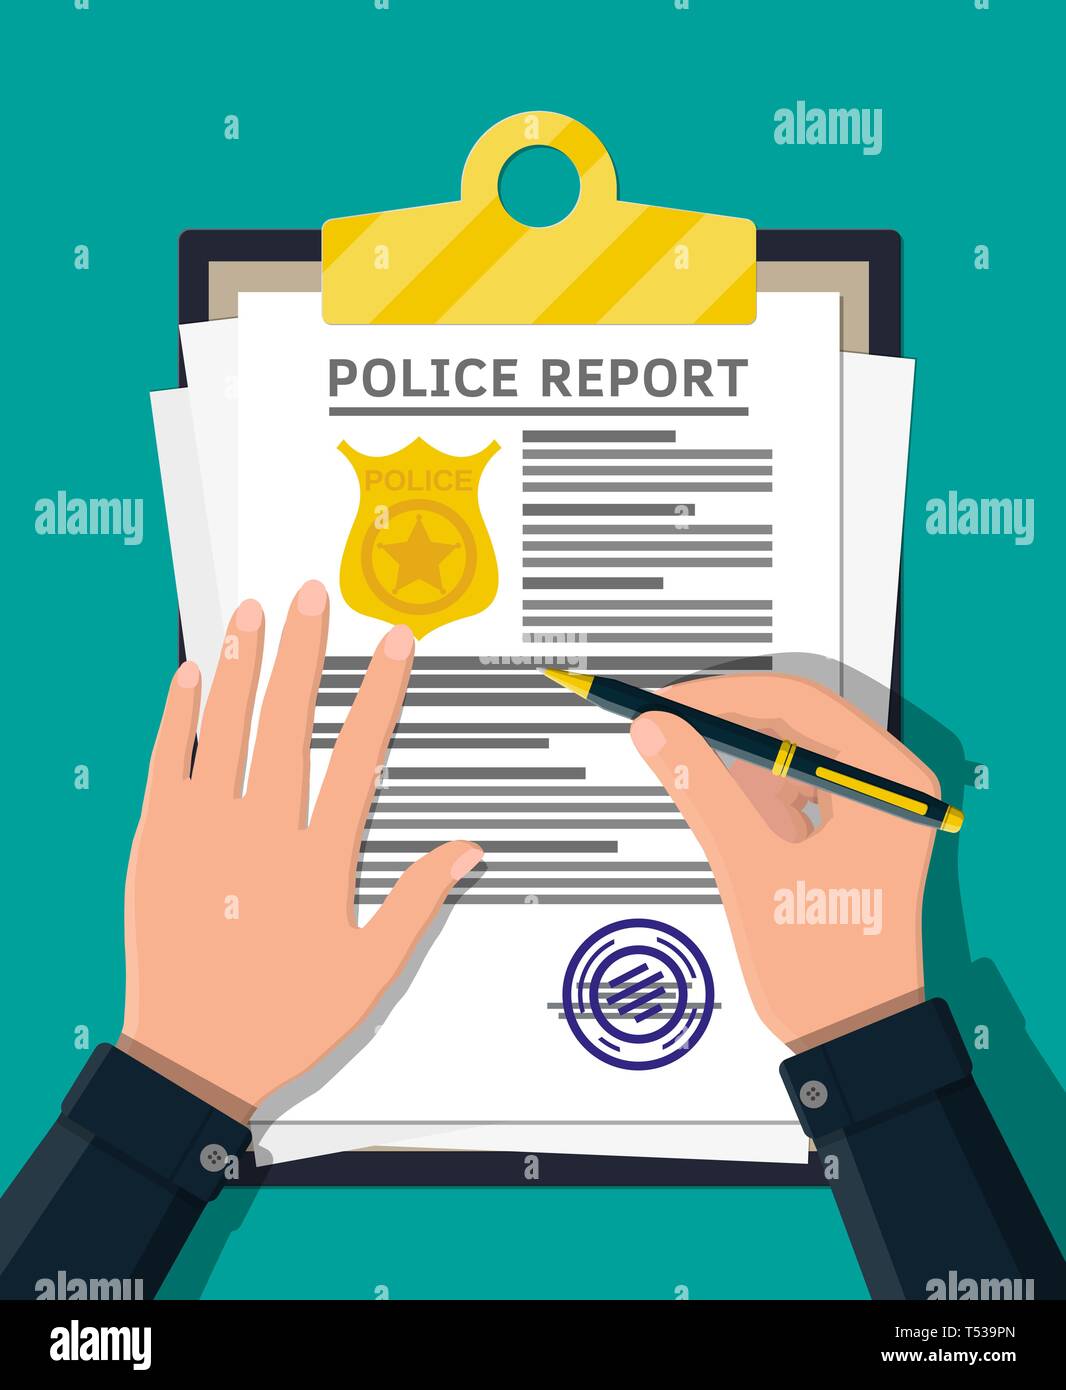 Clipboard with police report and pen in hand. Report sheet with gold police badge. Legal fine document and stack of papers with stamp. Vector illustra Stock Vector